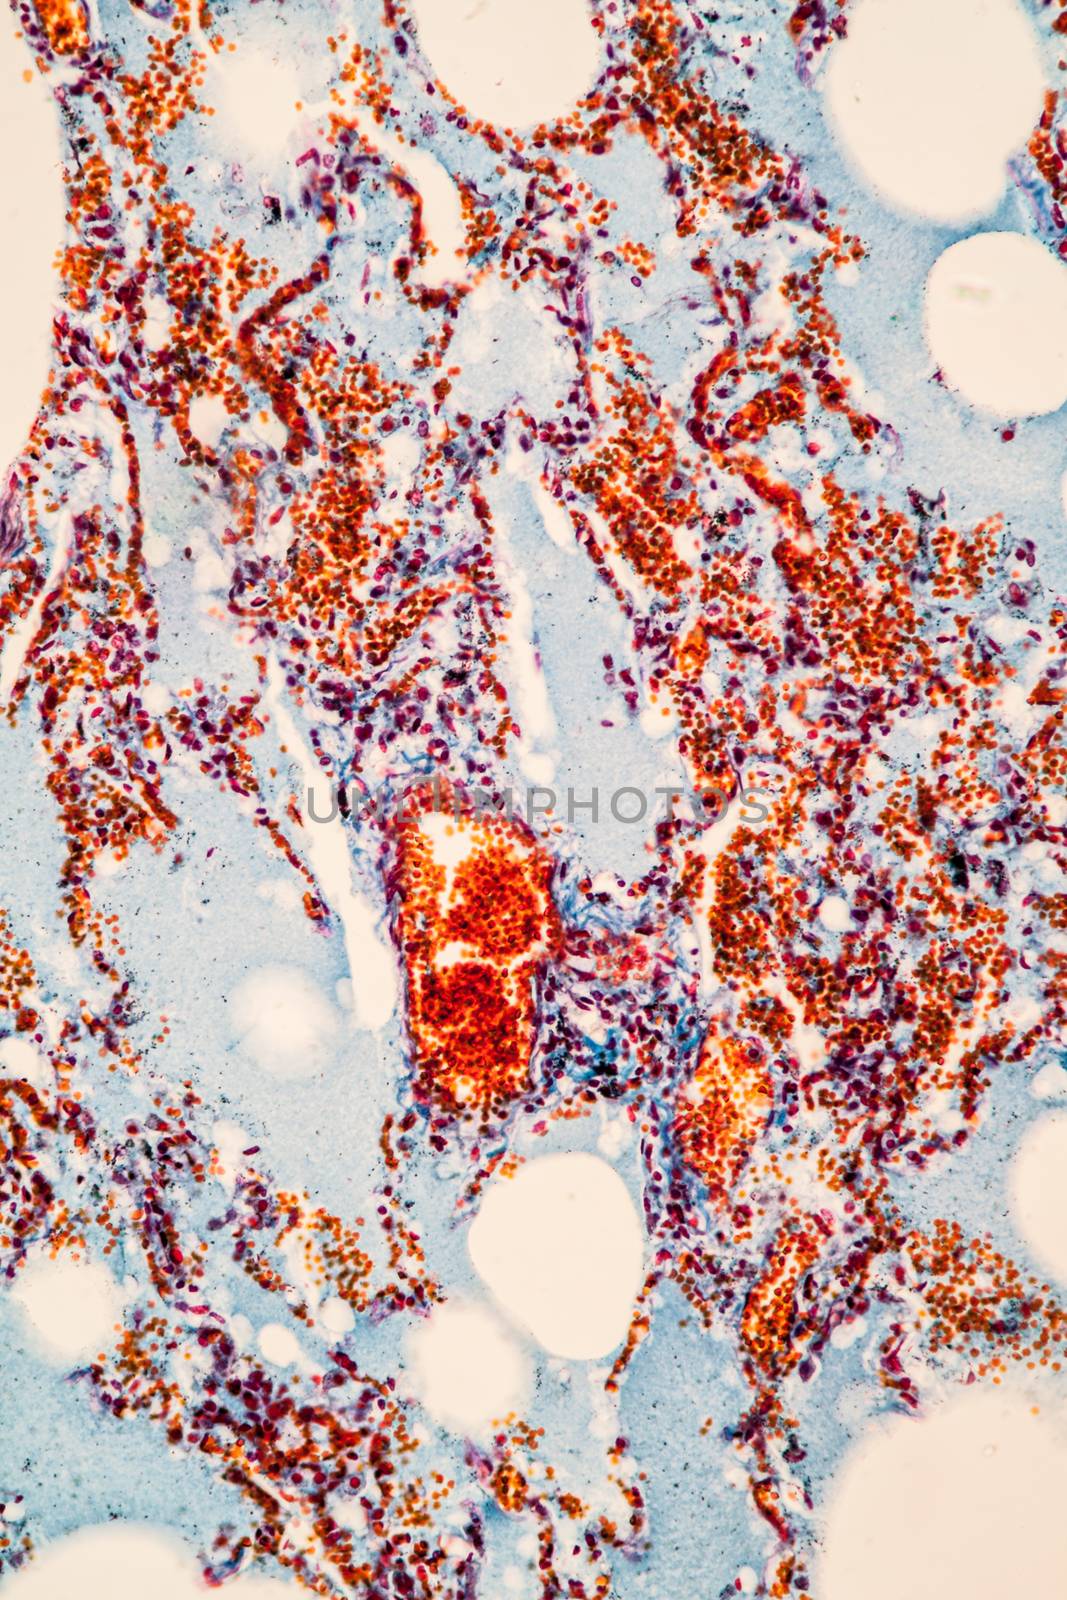 Flu of the lungs Diseased tissue 200x by Dr-Lange